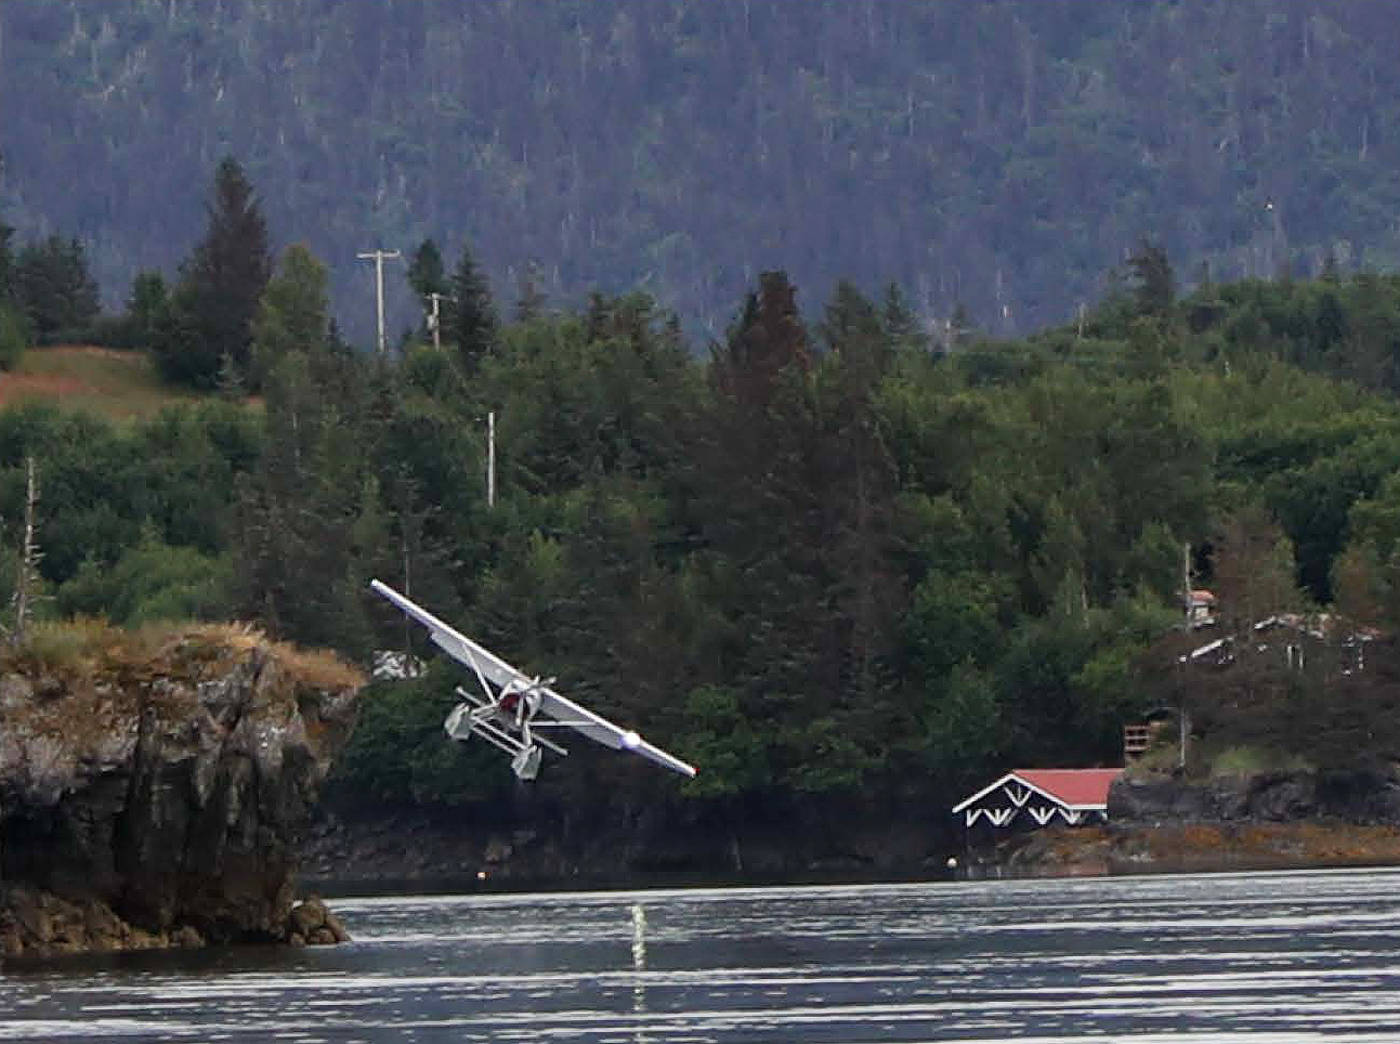 This photo from a National Transportation Safety Board report shows Alaska Dispatch News owner Alice Rogoff’s Cessna 206 colliding with a tree, causing a float to break off, during a crash on July 3, 2016 in Halibut Cove, Alaska. The NTSB noted Rogoff’s attempted landing took place over glassy water conditions. (Photo courtesy NTSB)